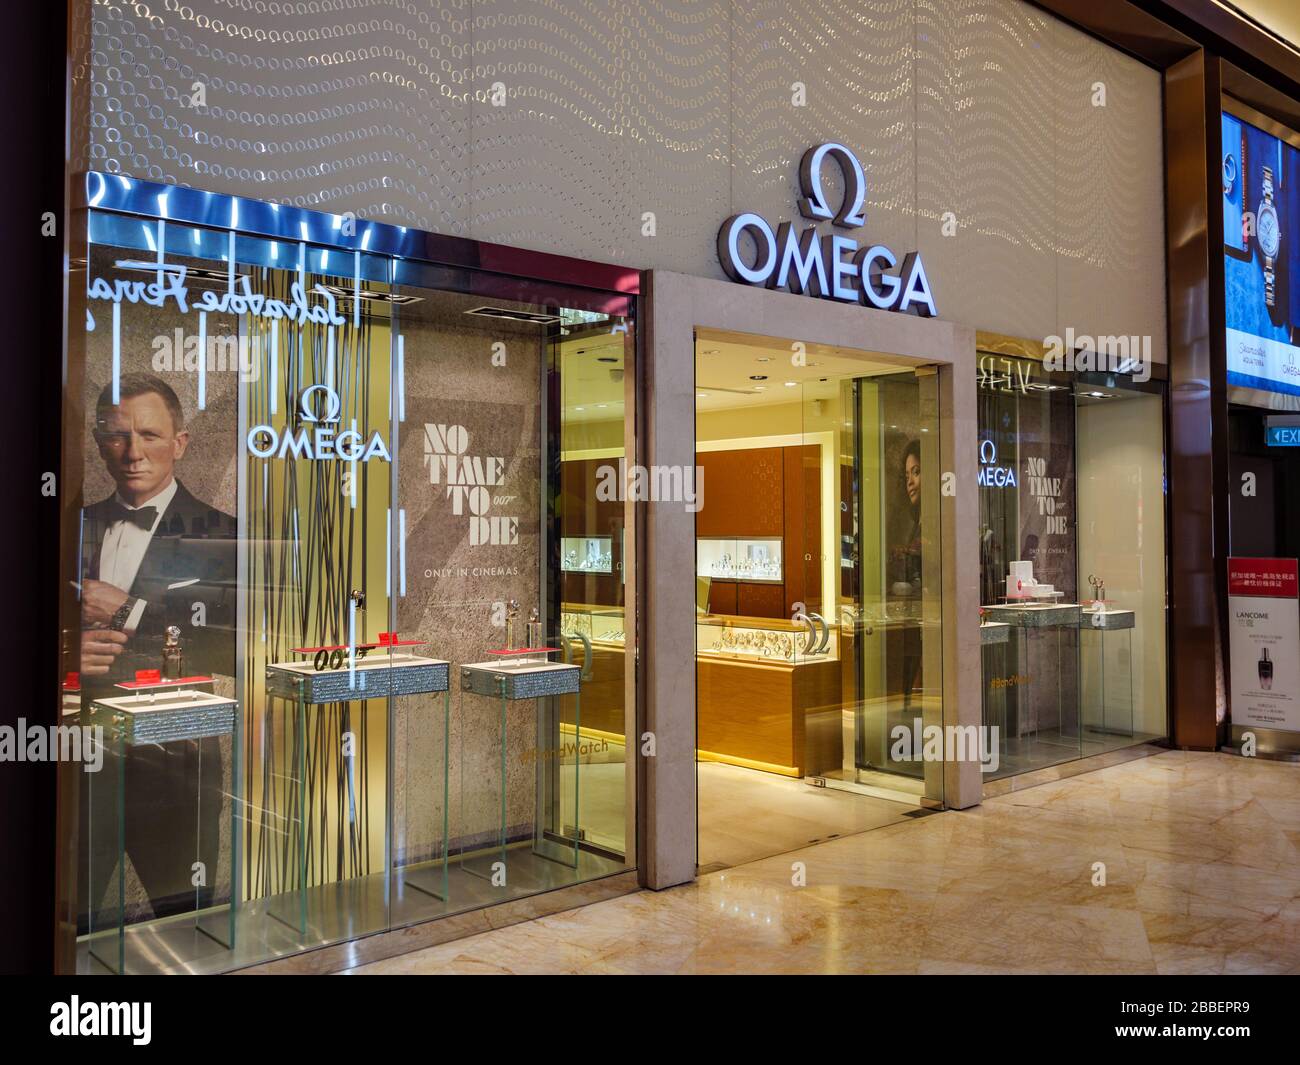 omega boutique employee discount